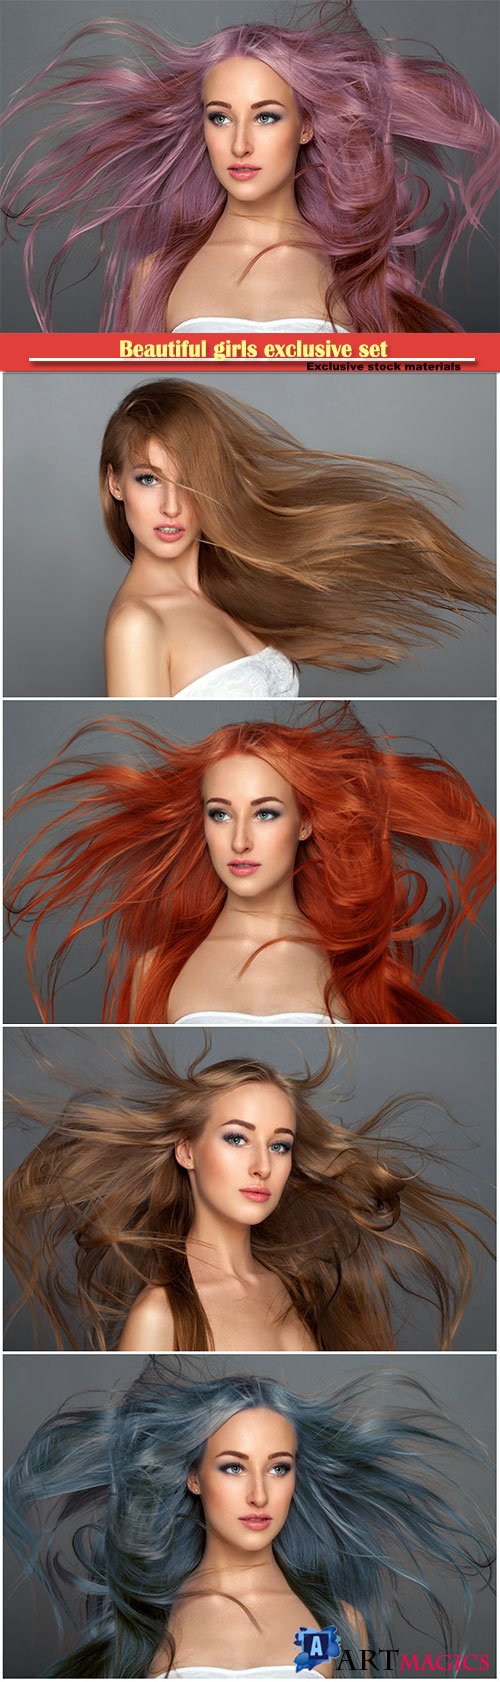 Beautiful girls with different hair color